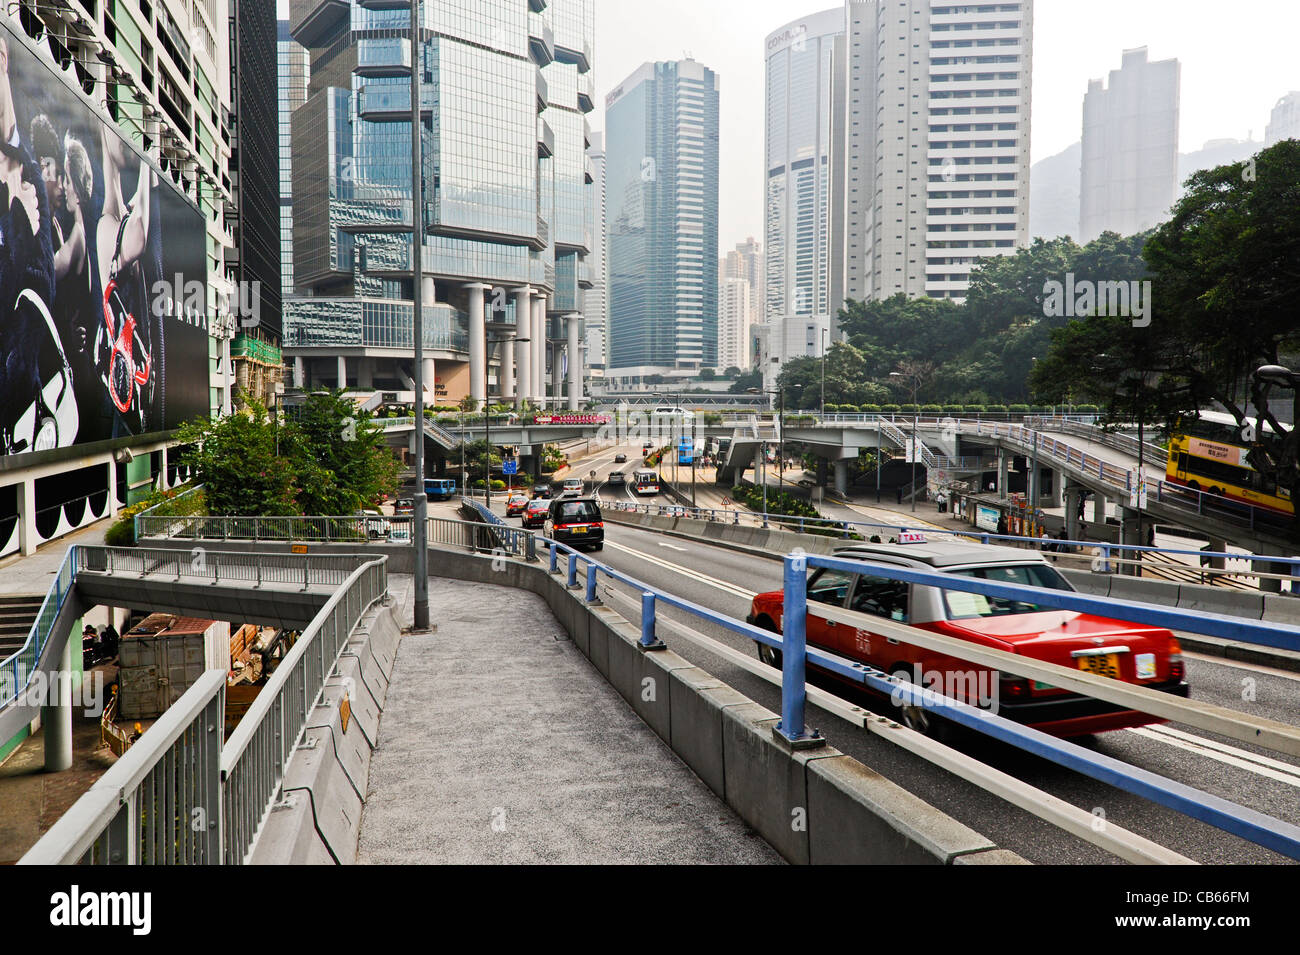 The financial centre of Hong Kong is full of high rises, banks and busy highways. Stock Photo